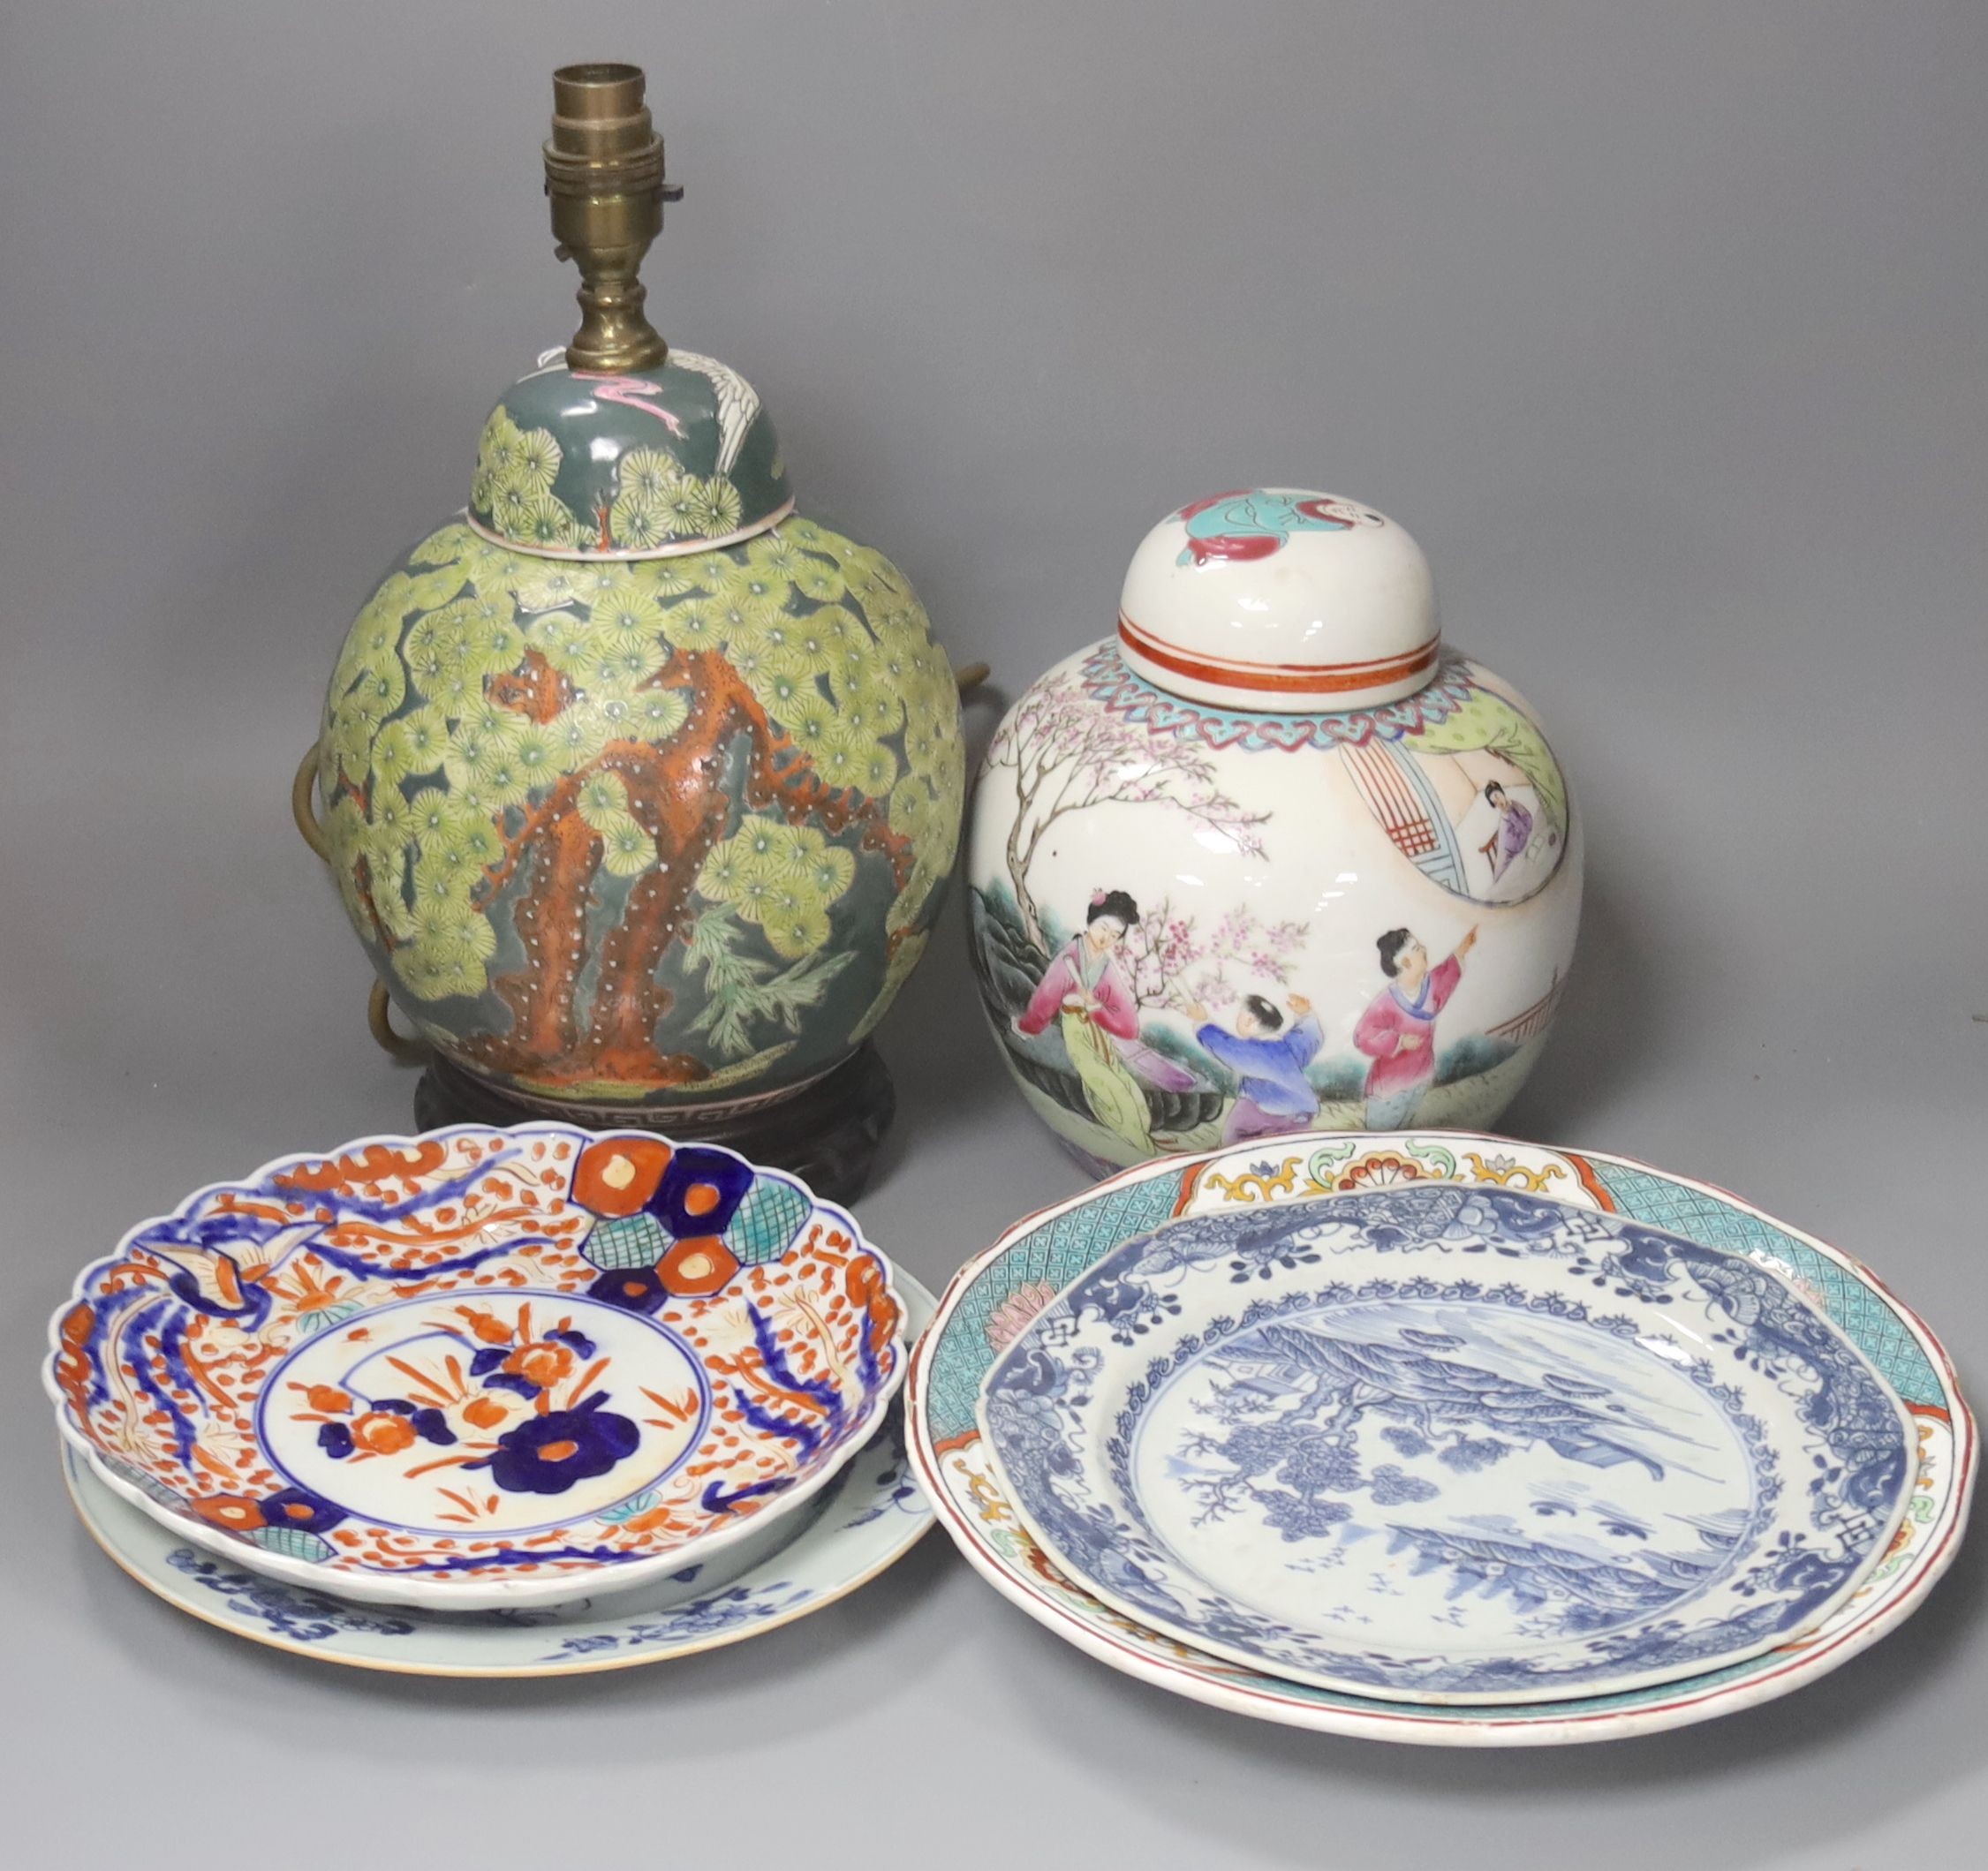 Two Chinese export blue and white plates, two ginger jars, a crackle ware vase and a lamp